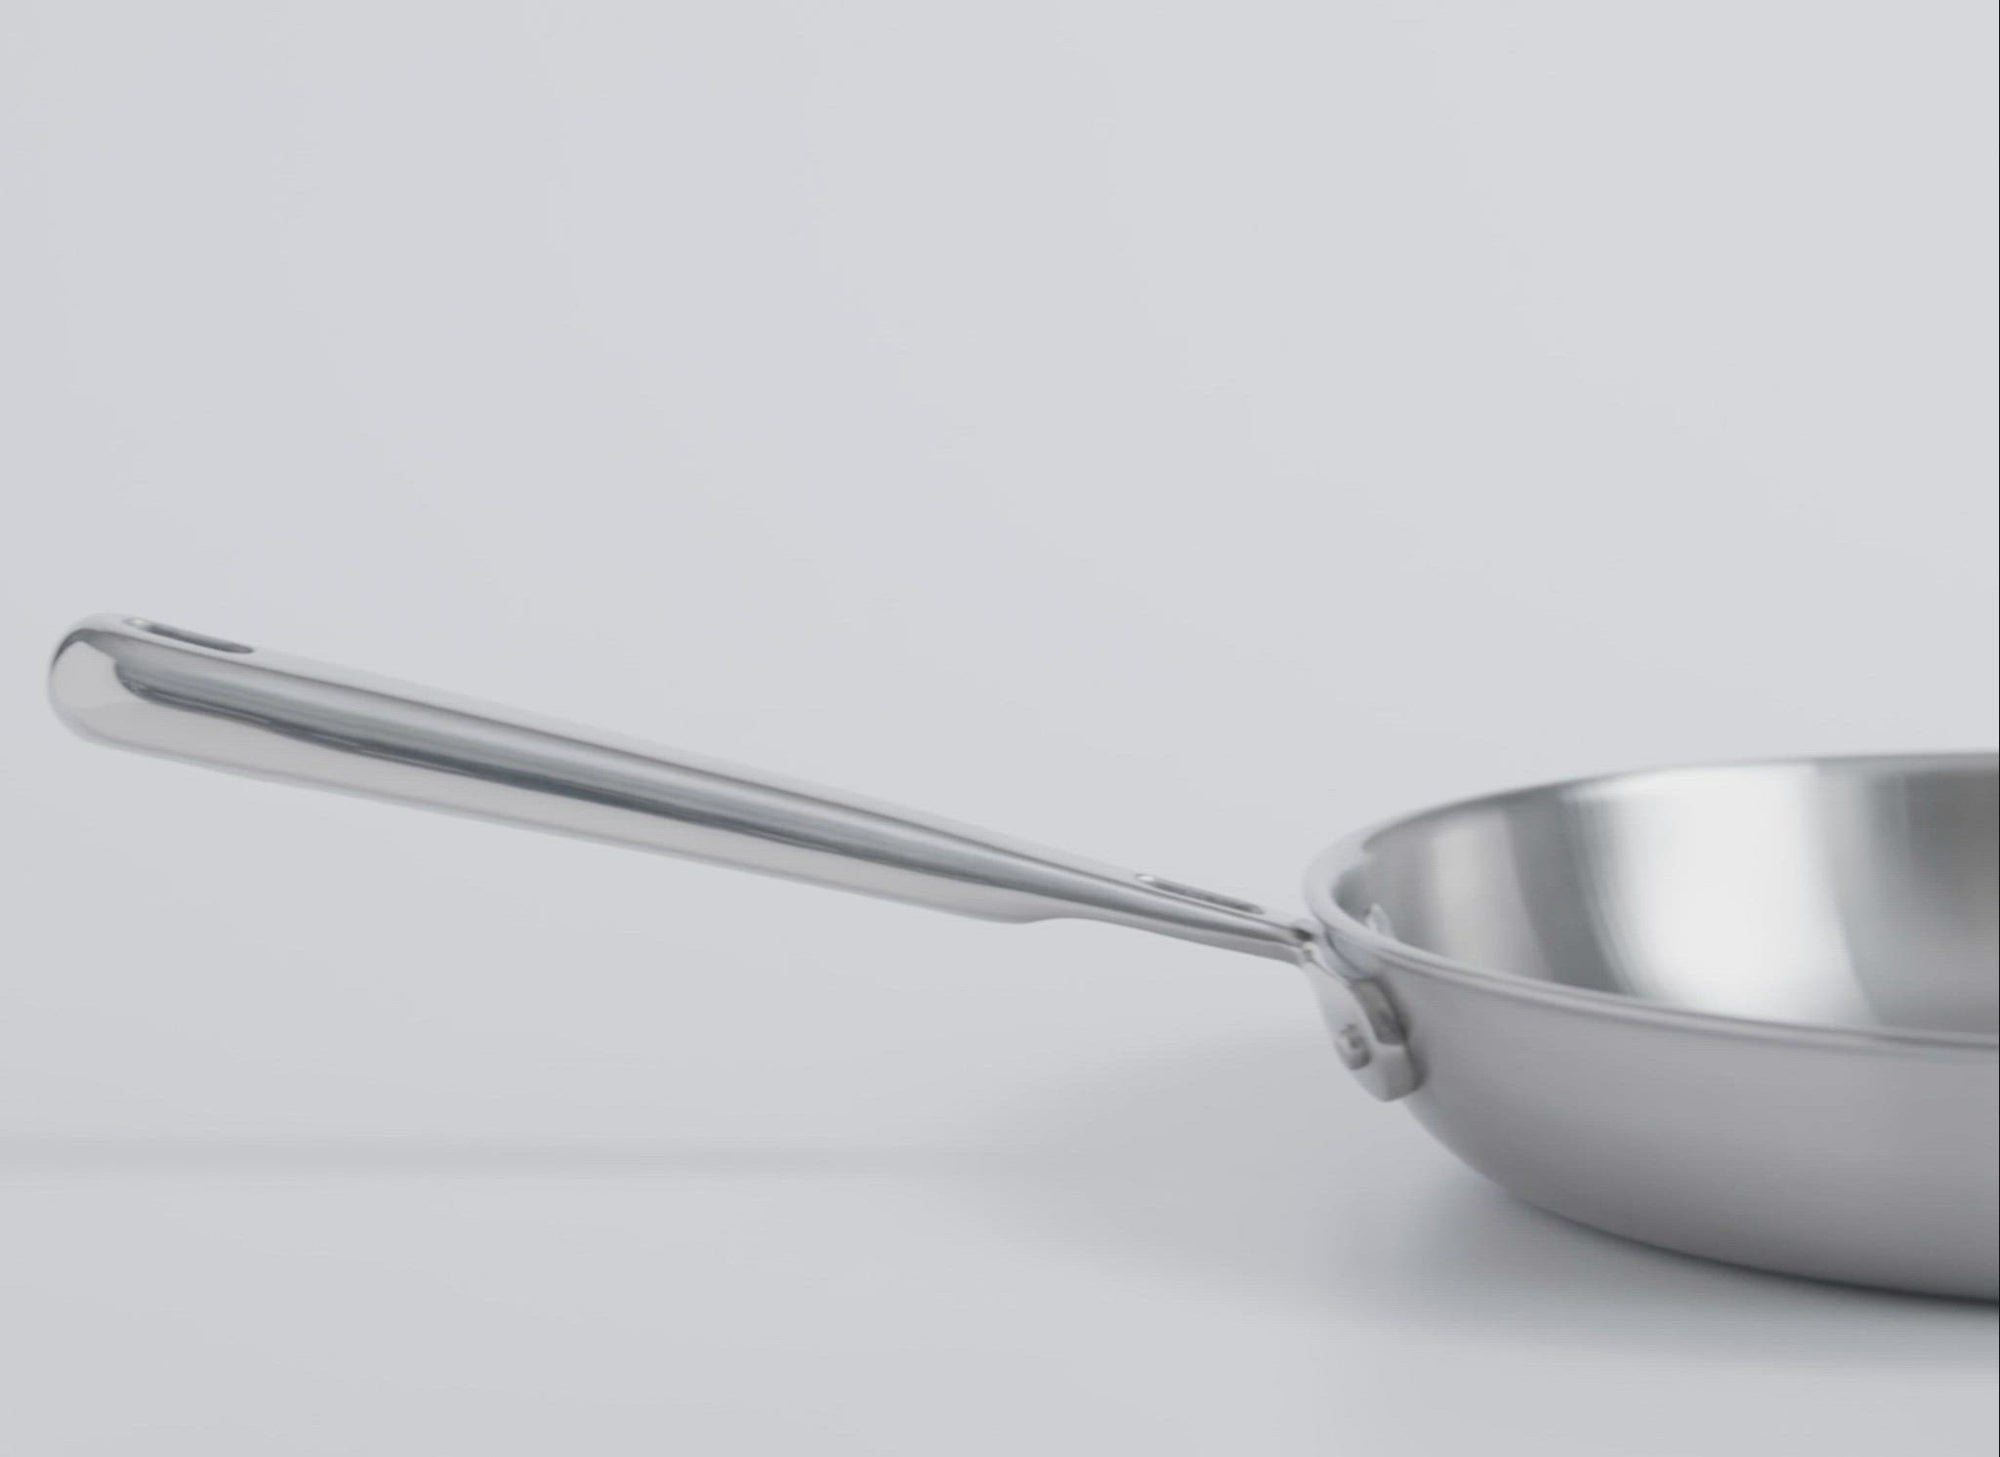 Misen Stainless Steel Pan Review